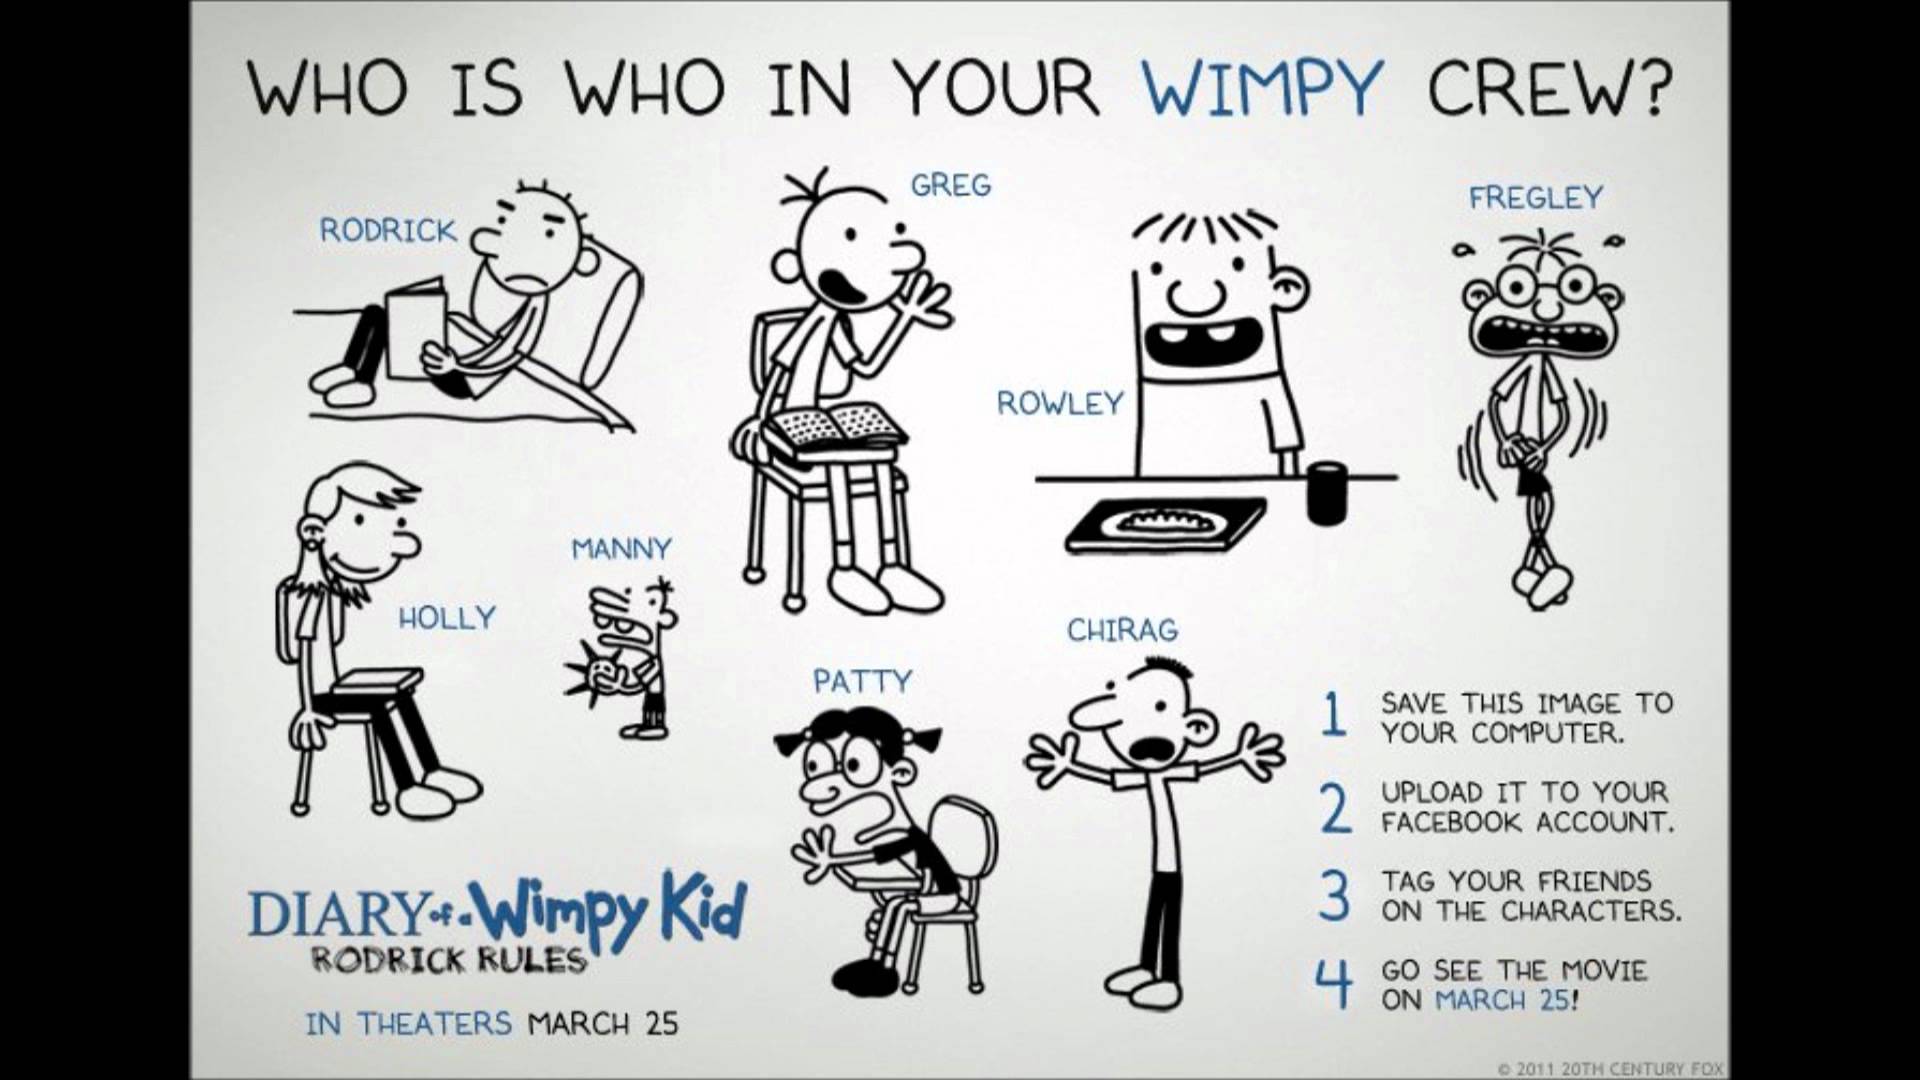 Diary of a Wimpy Kid: Rodrick Rules Movie Wallpaper